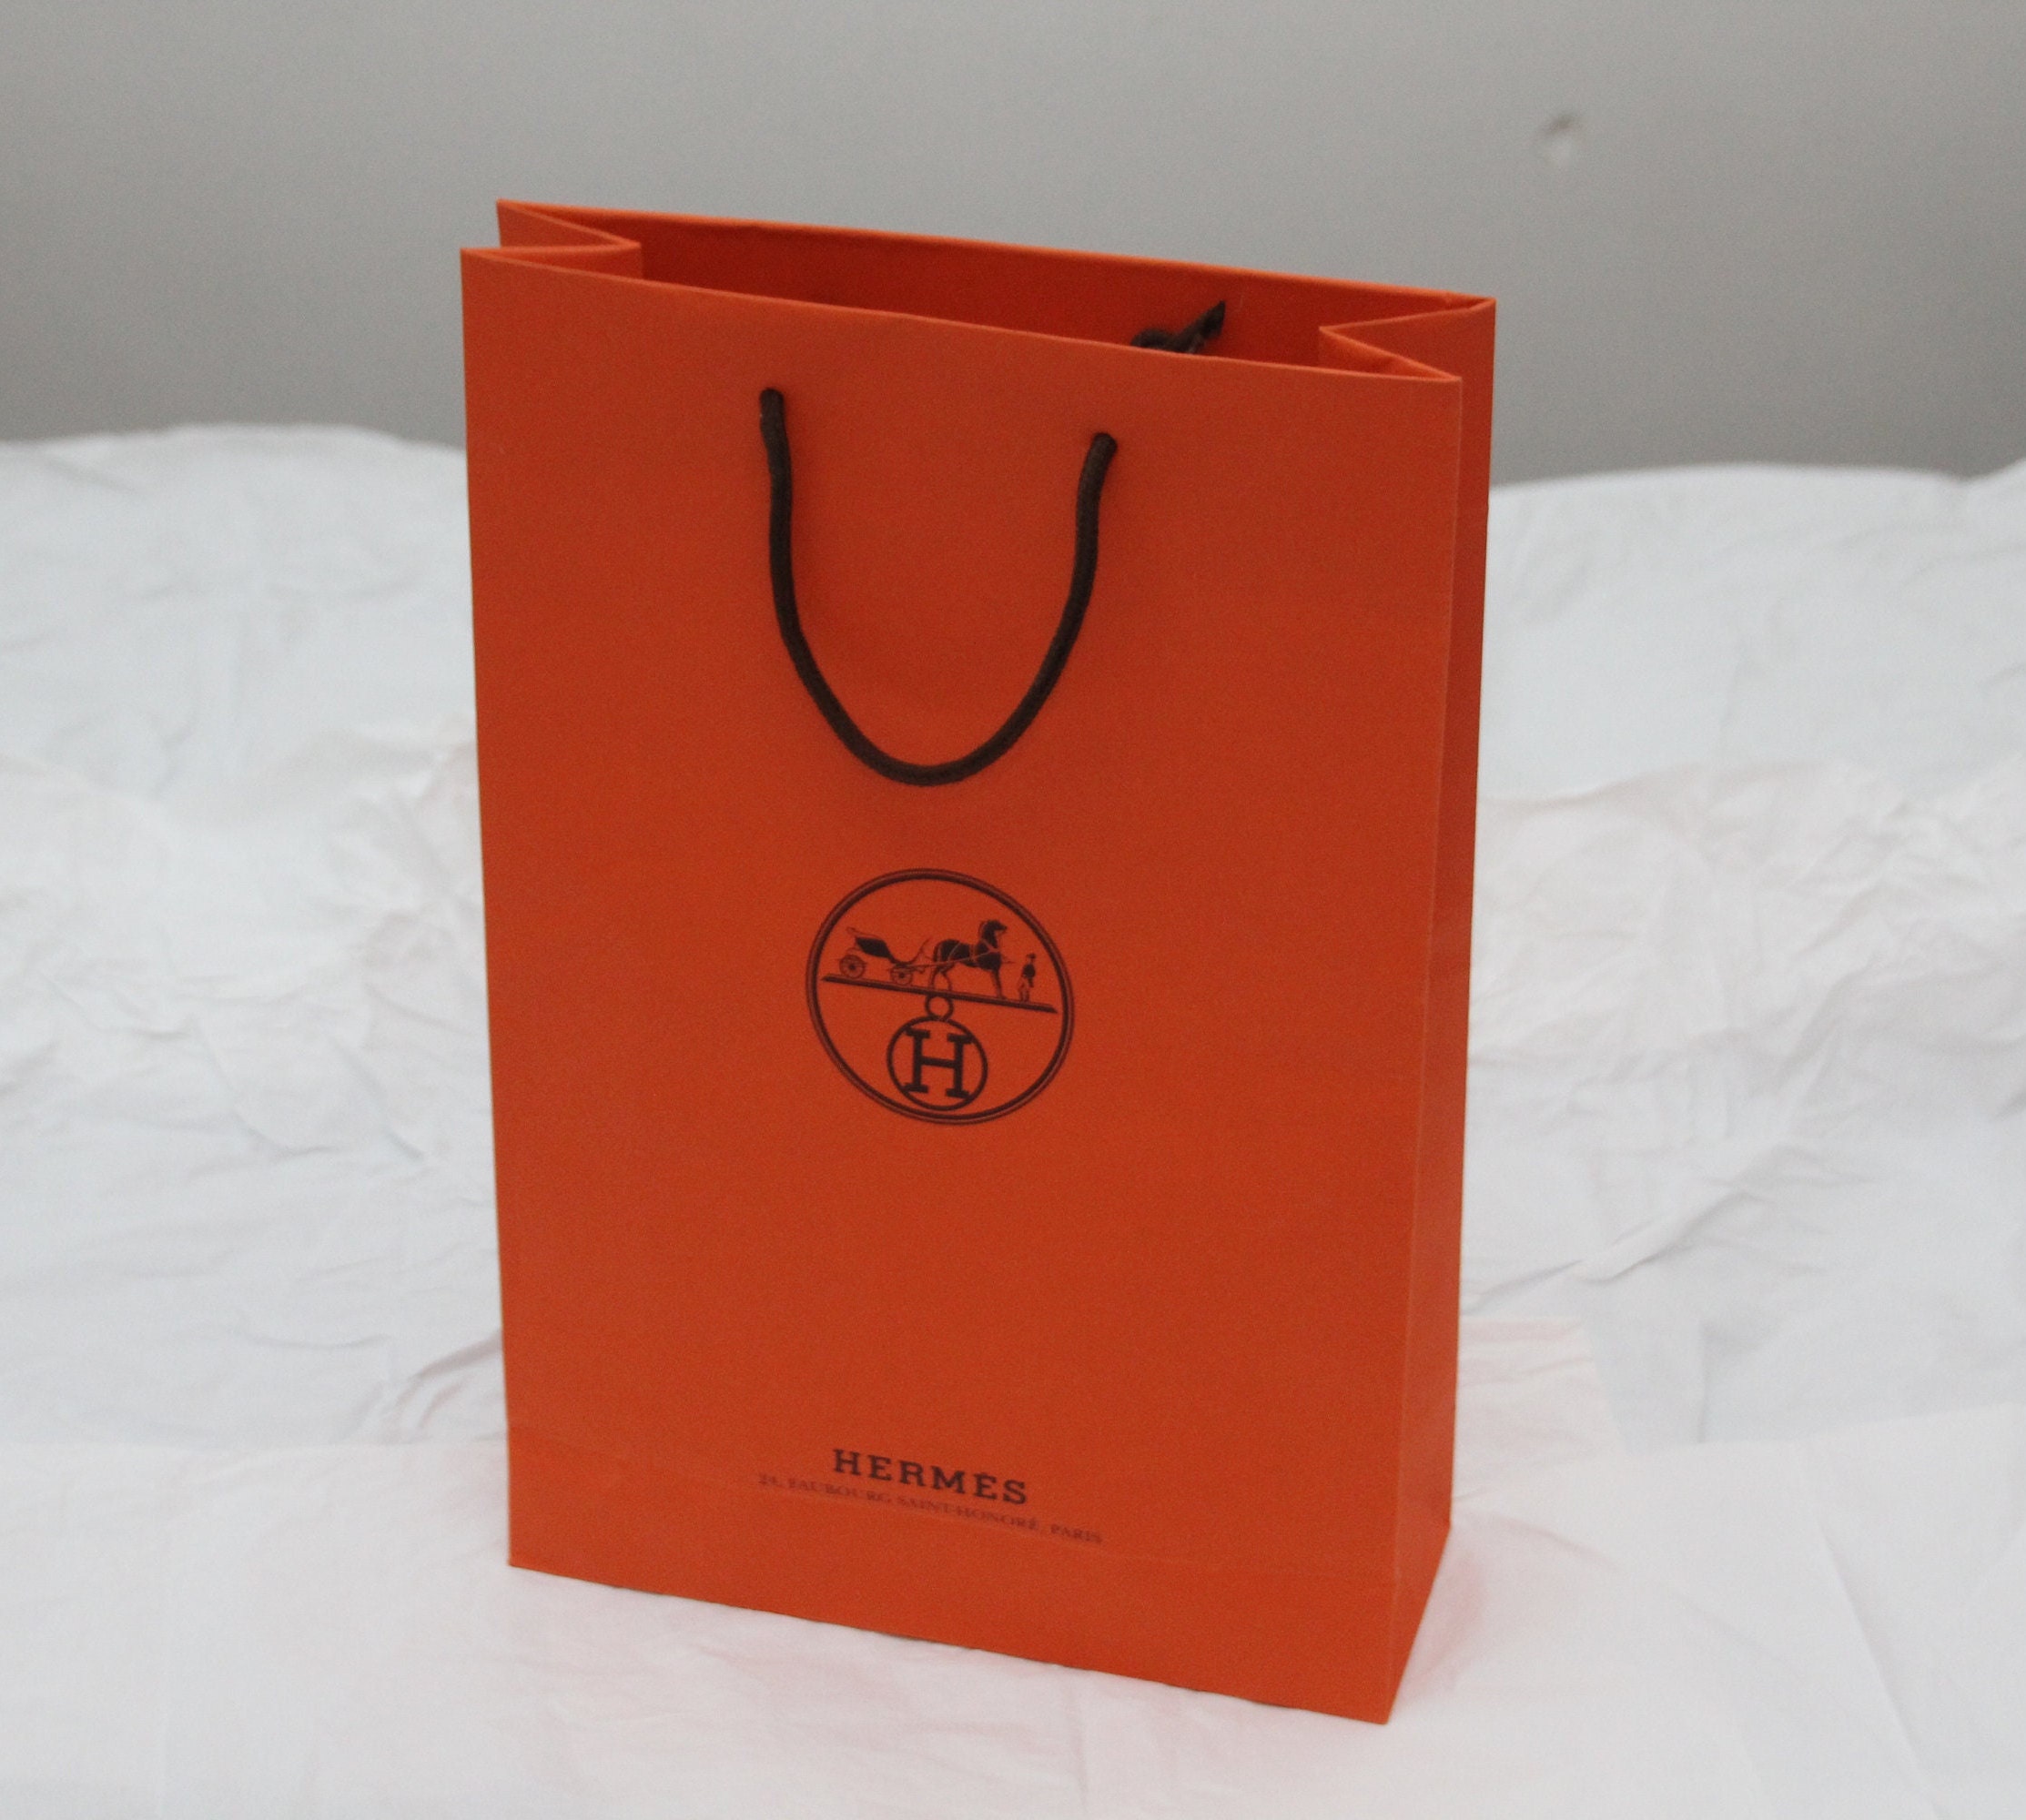 Hermes Empty Orange Shopping Gift Paper Bag Authentic USA